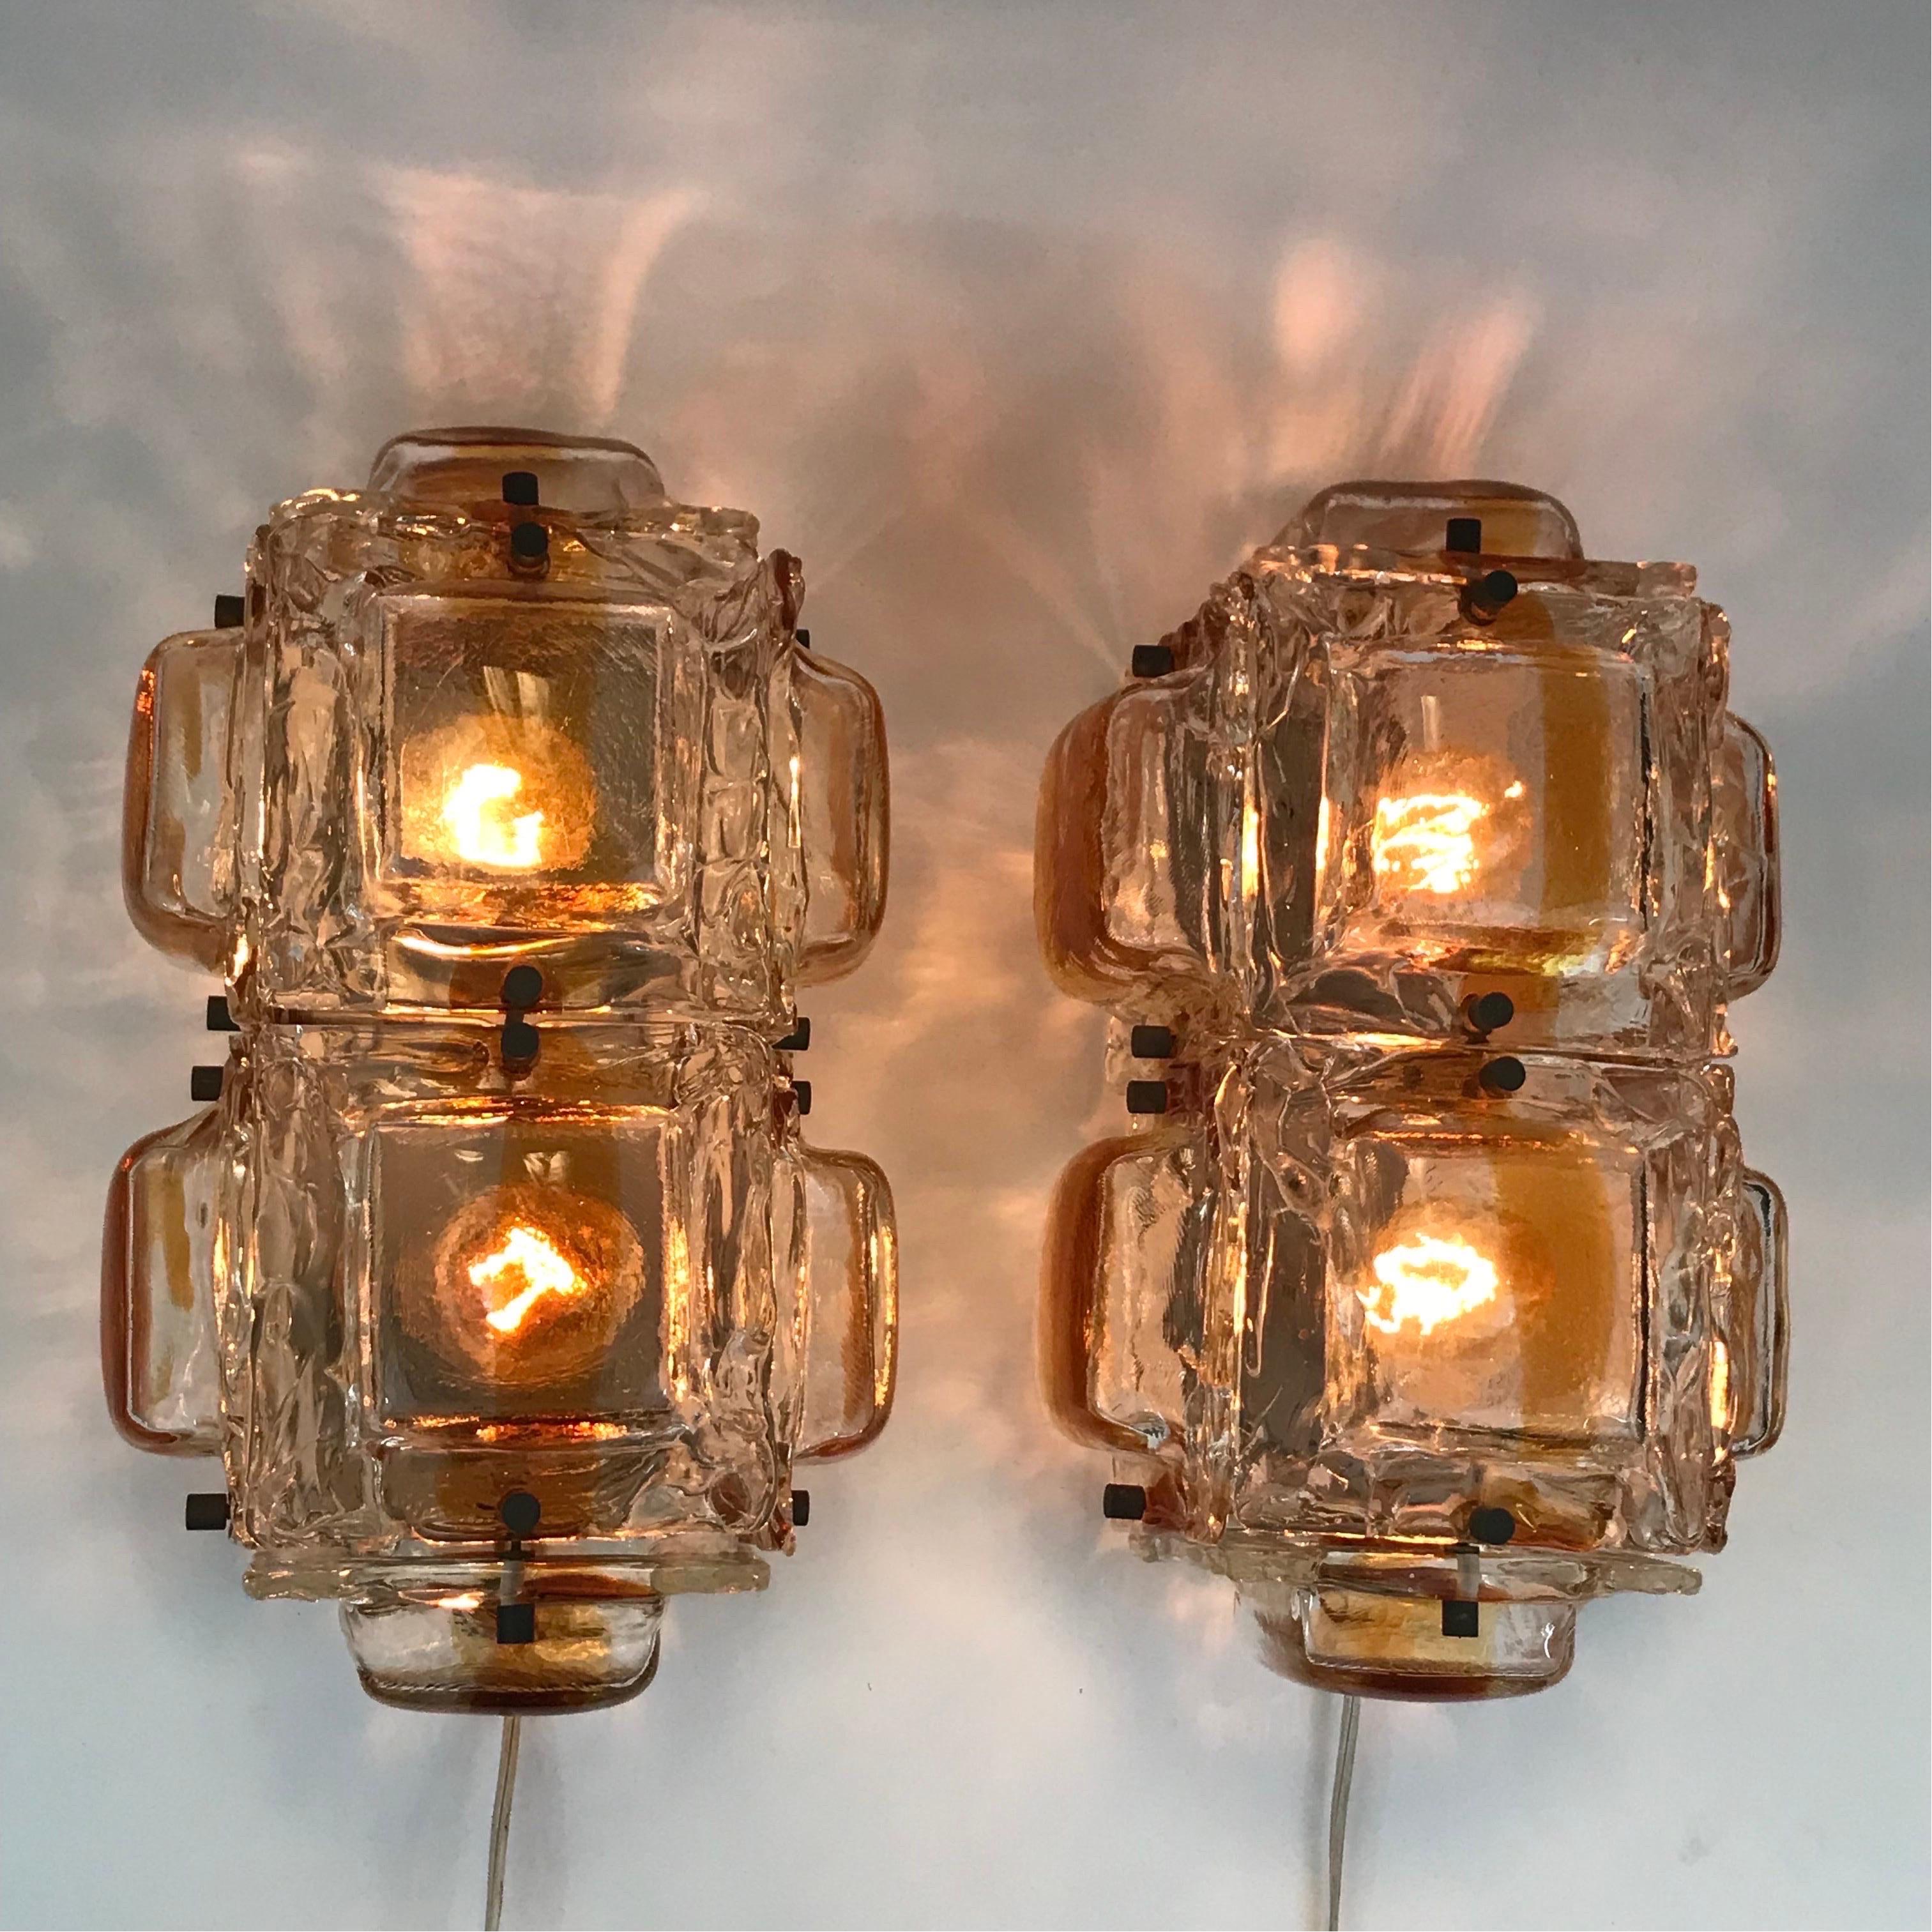 A large pair of rectangular Mazzega sconces comprised of a metal frame housing two bulbs and supporting the armature to encase the lights in eight thick fused glass square shades in clear crystal color with an amber stripe in each. In overall